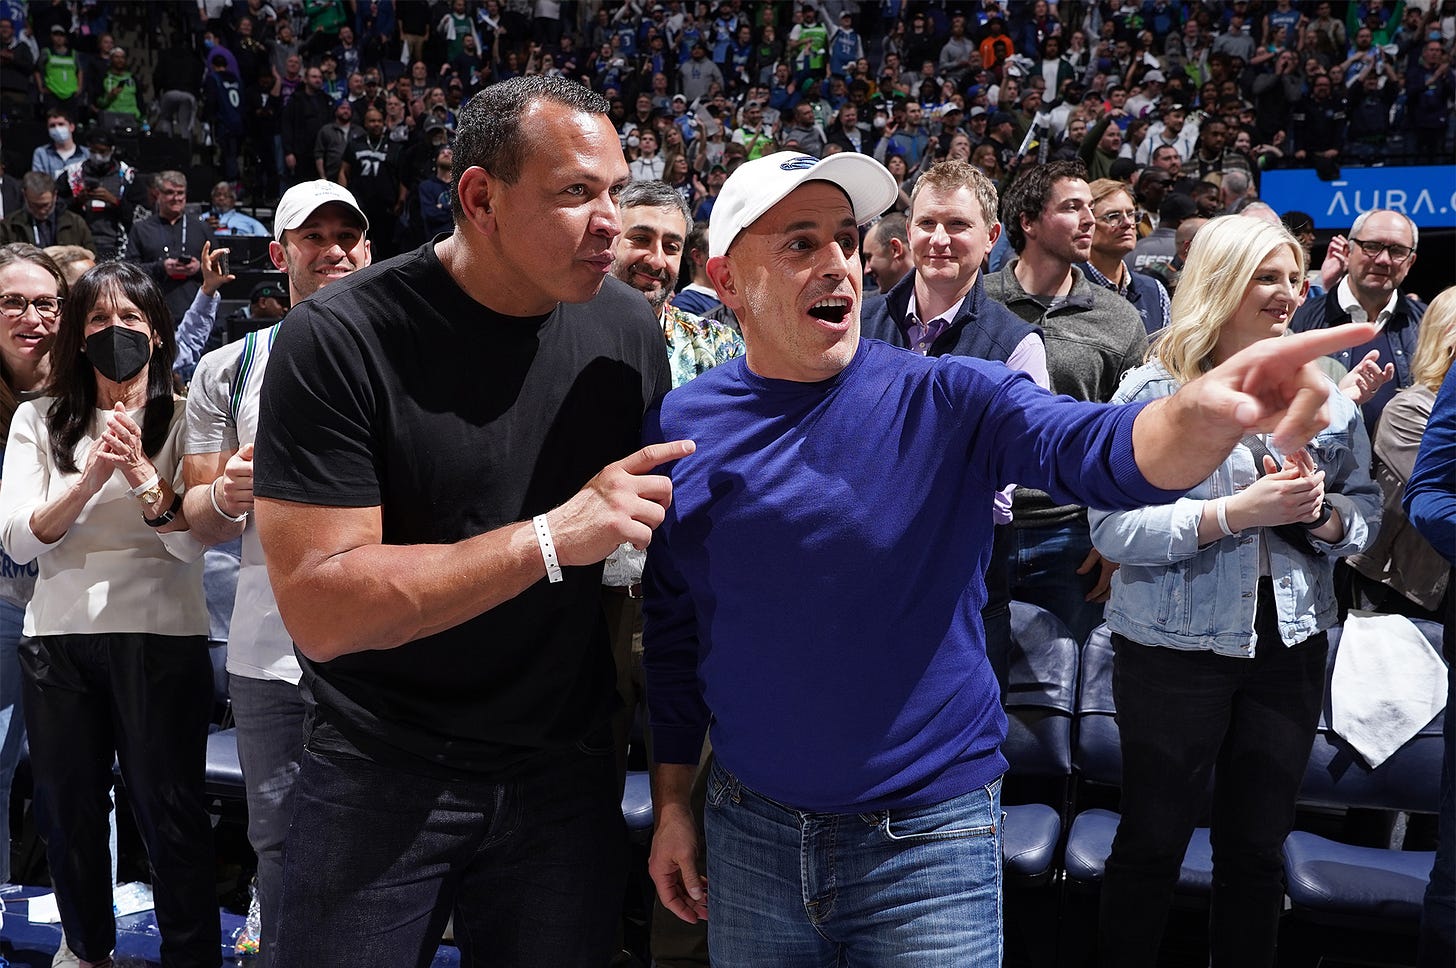 A-Rod says have his $250M due for Minnesota Timberwolves